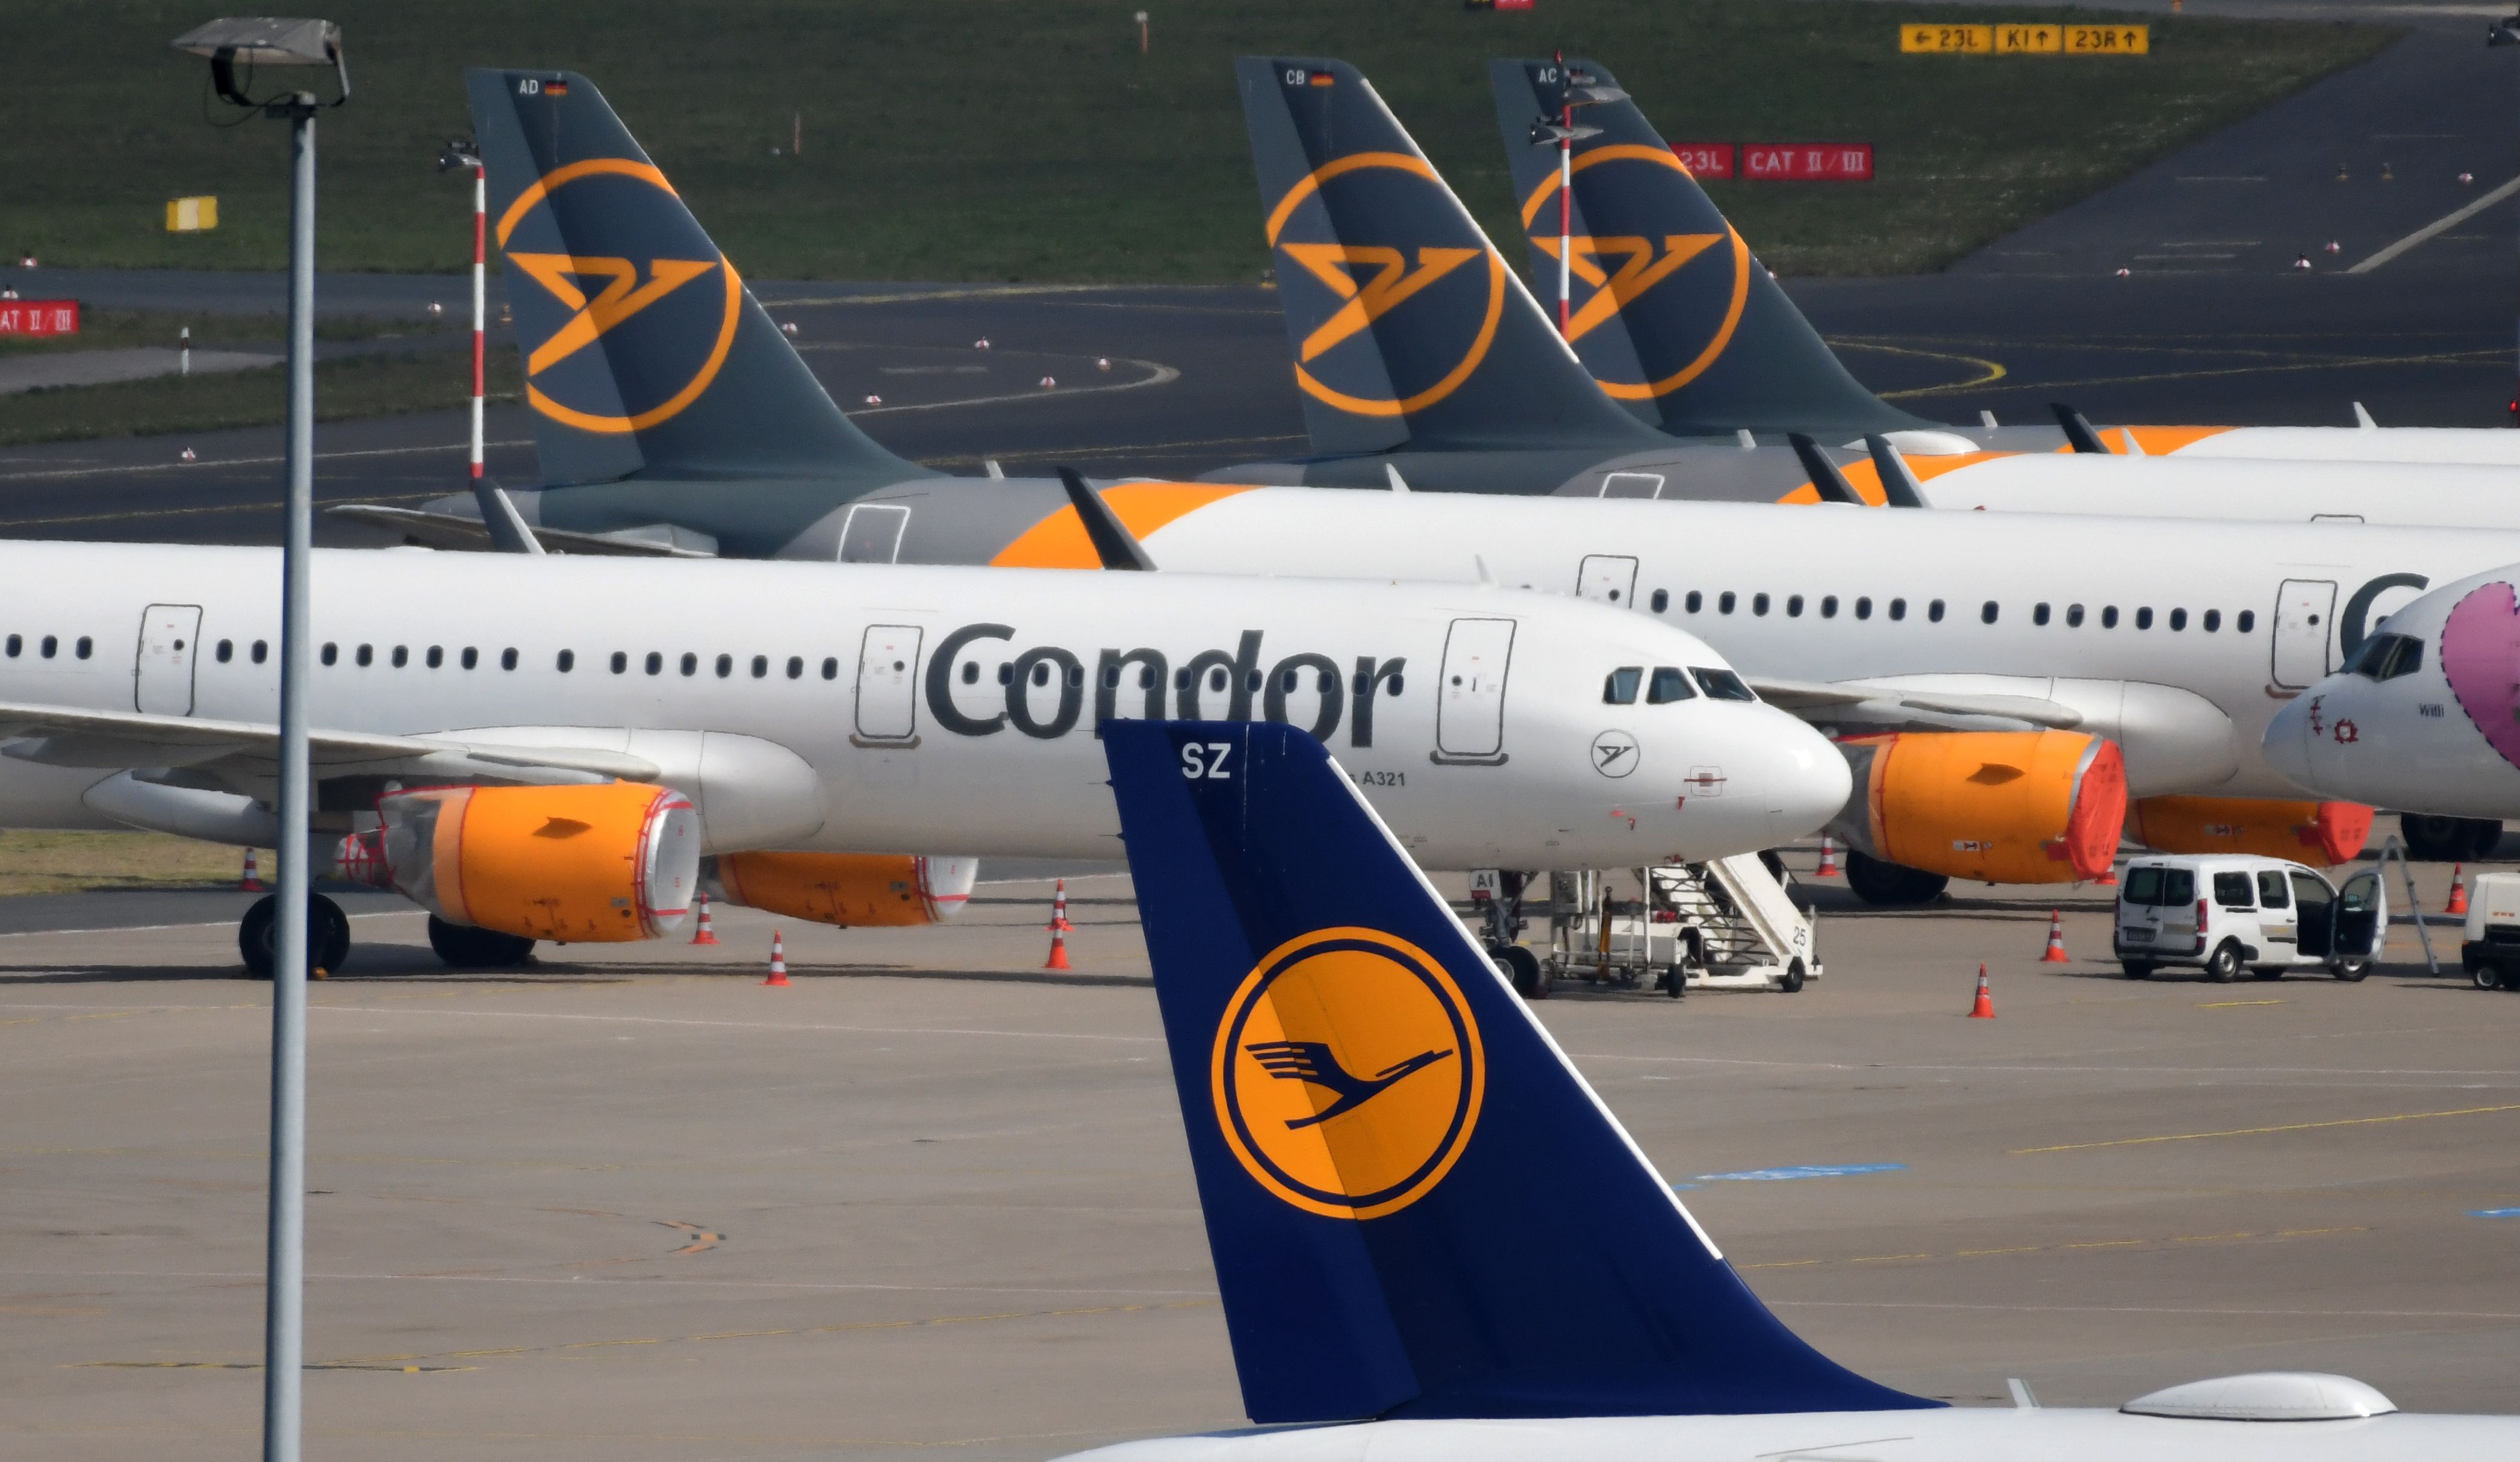 Condor and Lufthansa planes parked on apron